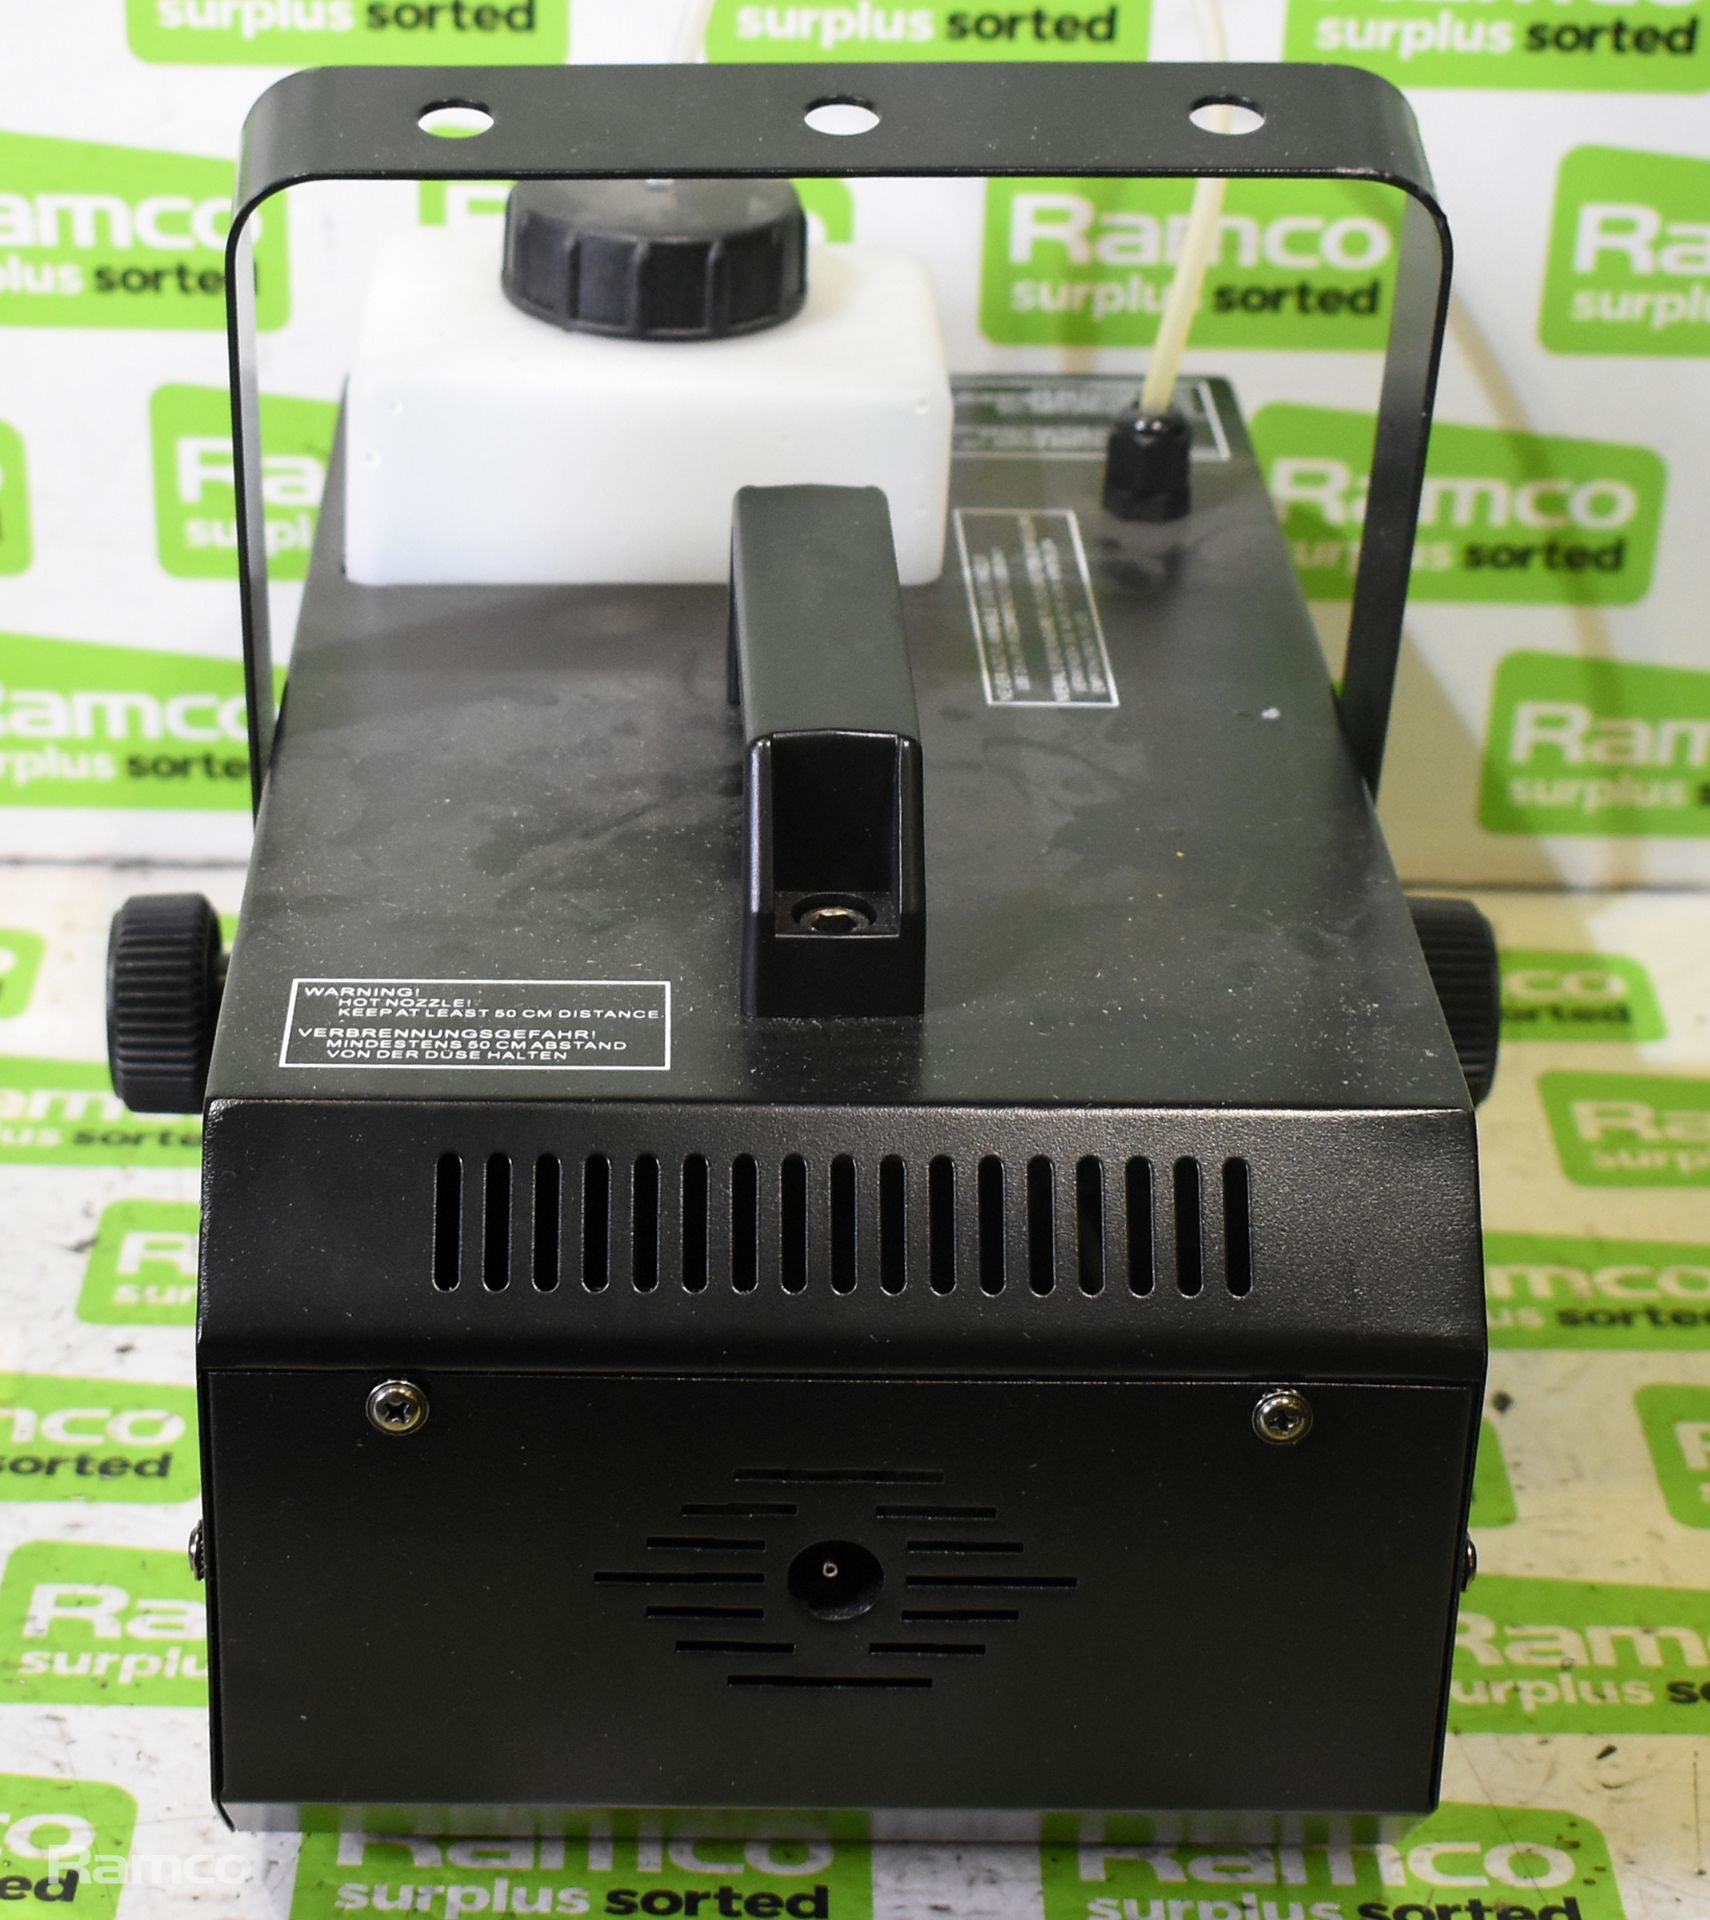 Stairville AF-40 DMX mini fog machine with remote - Image 5 of 7